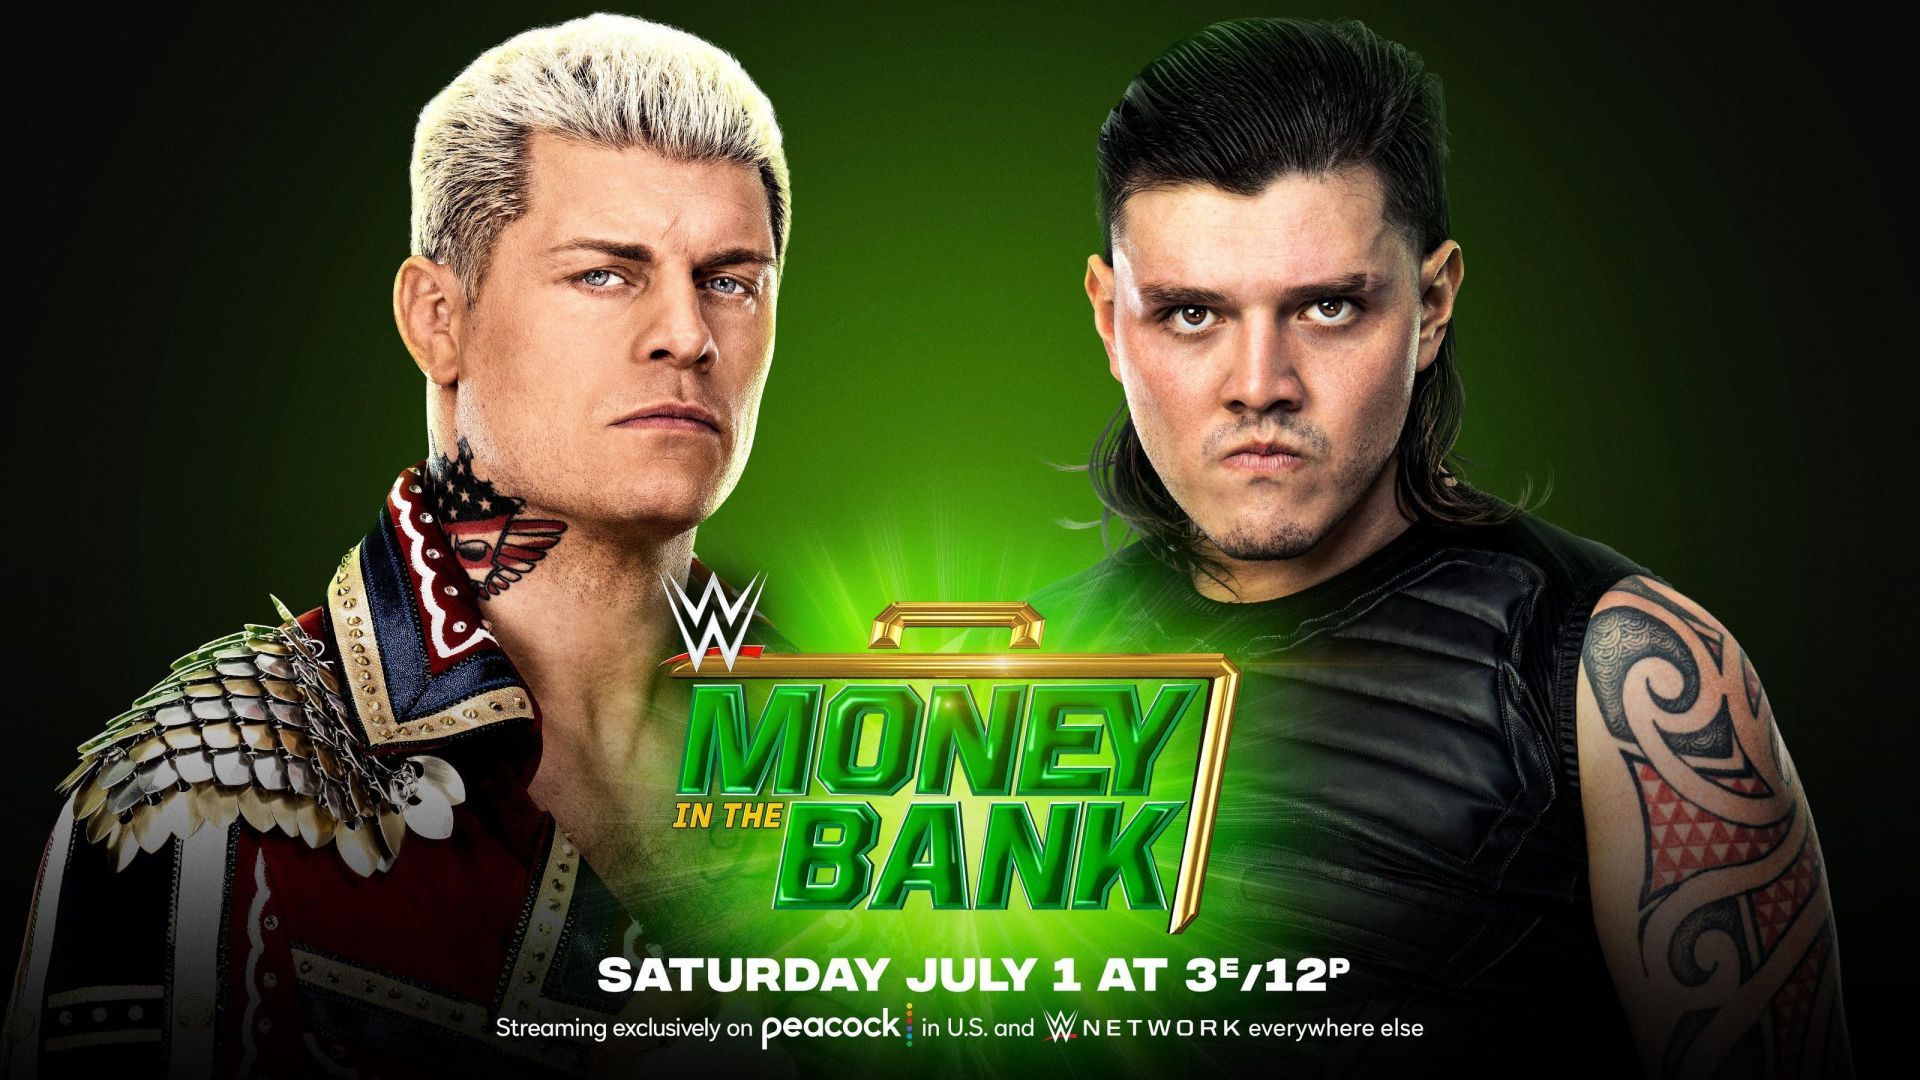 Which storied wrestling family will come out on top at Money in the Bank in London?